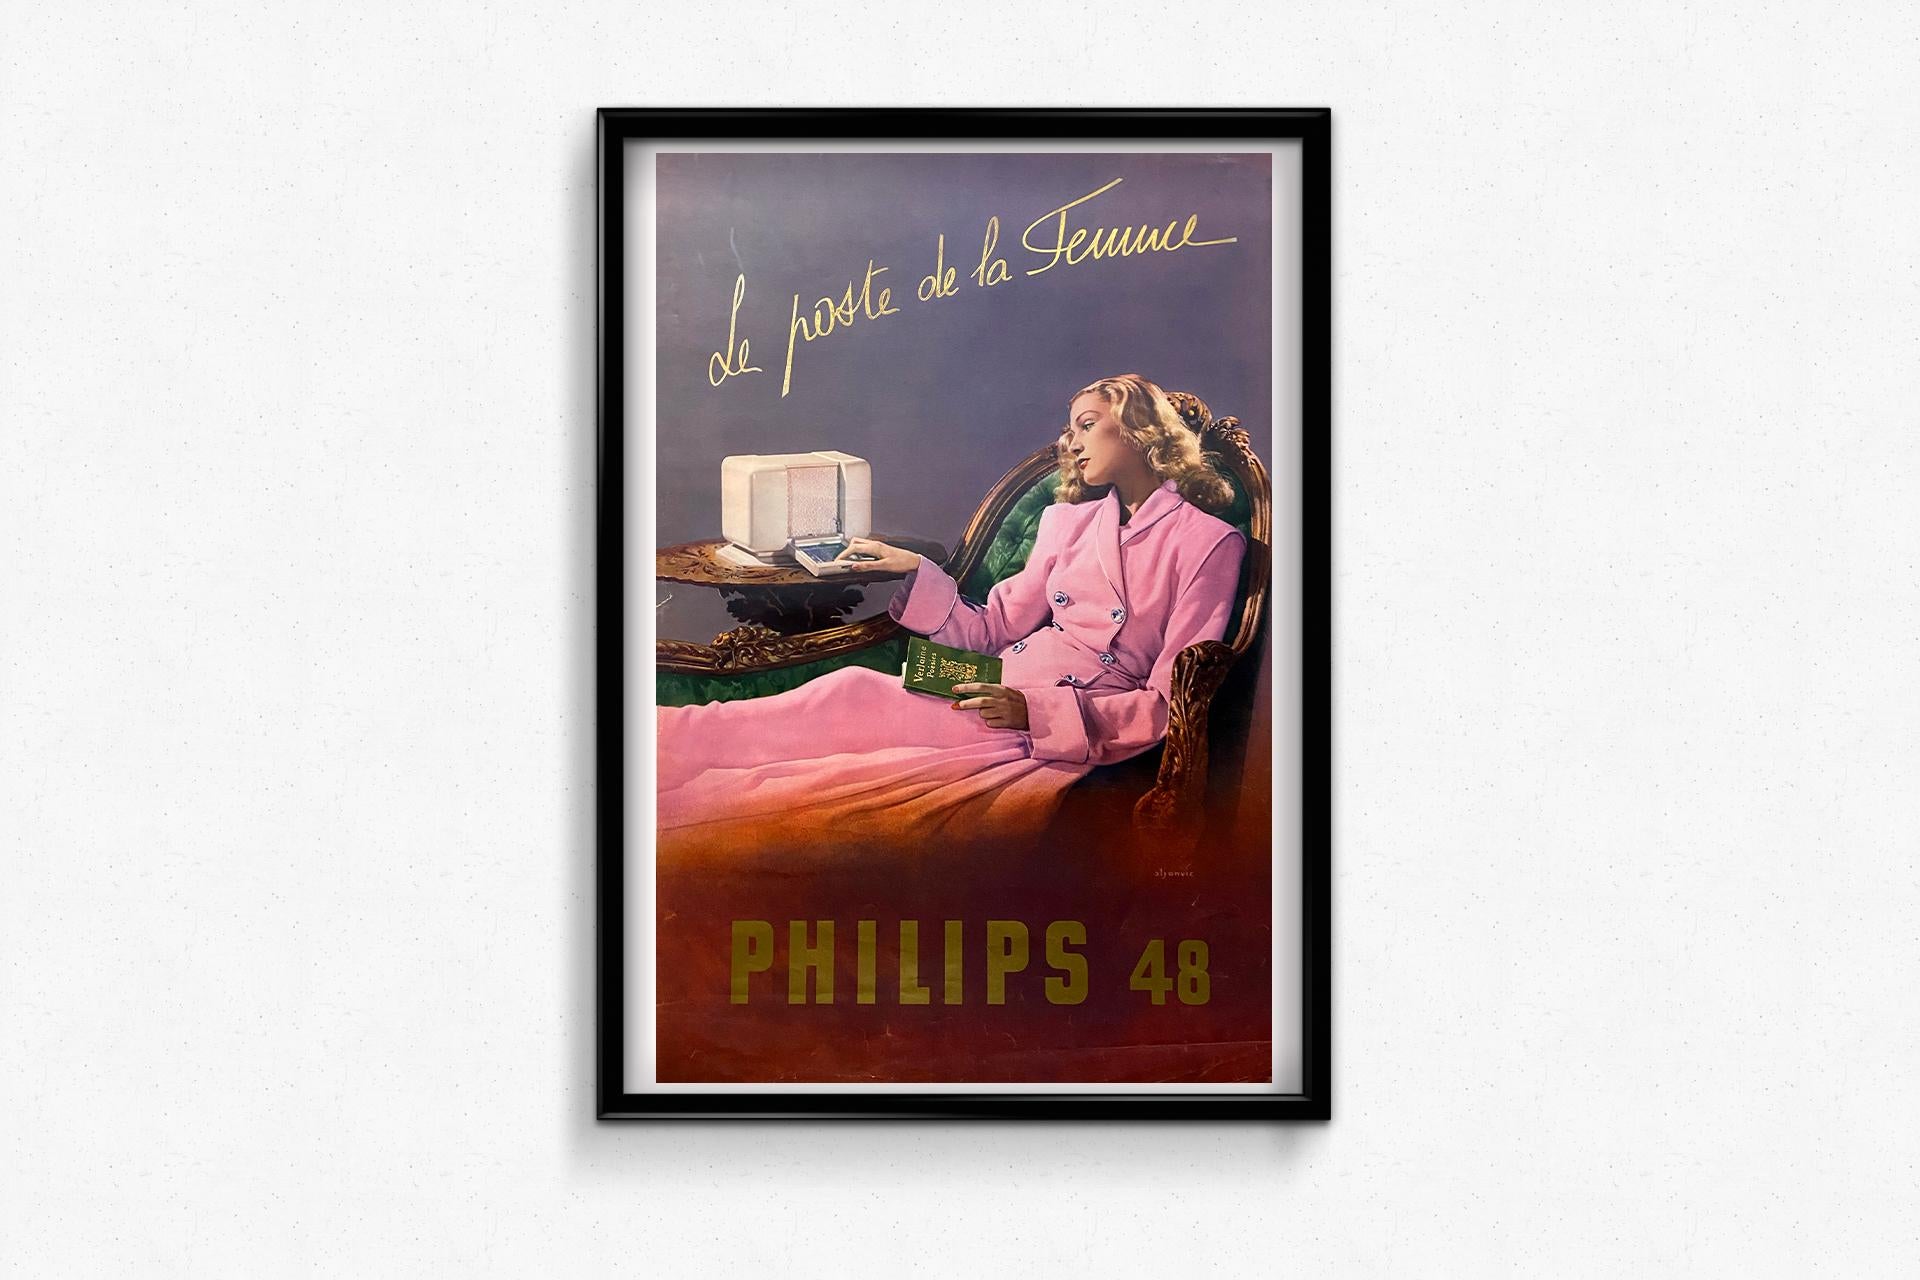 Advertising poster realized by Aljanvic in 1948 for the Phillips brand For Sale 1